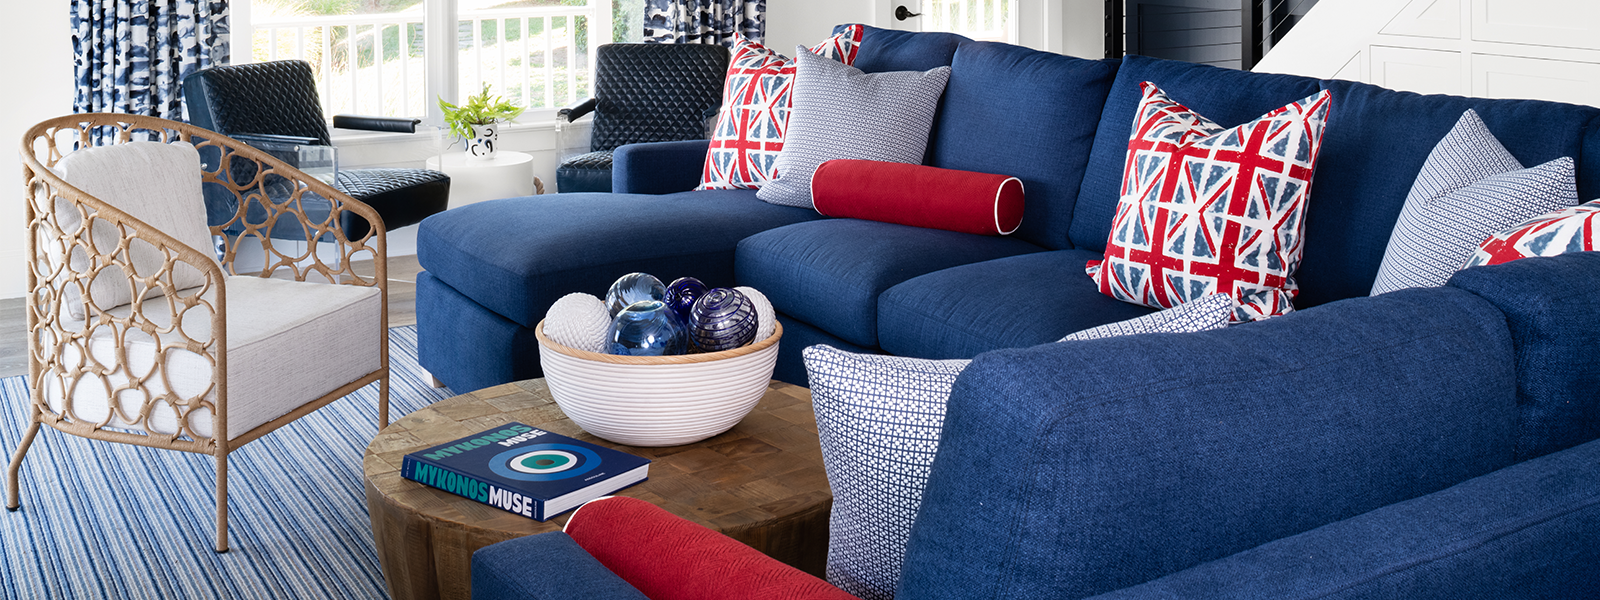 Close up of living room with blue sectional with union jack pillows and wicker side chair - Jamie Merida Interiors